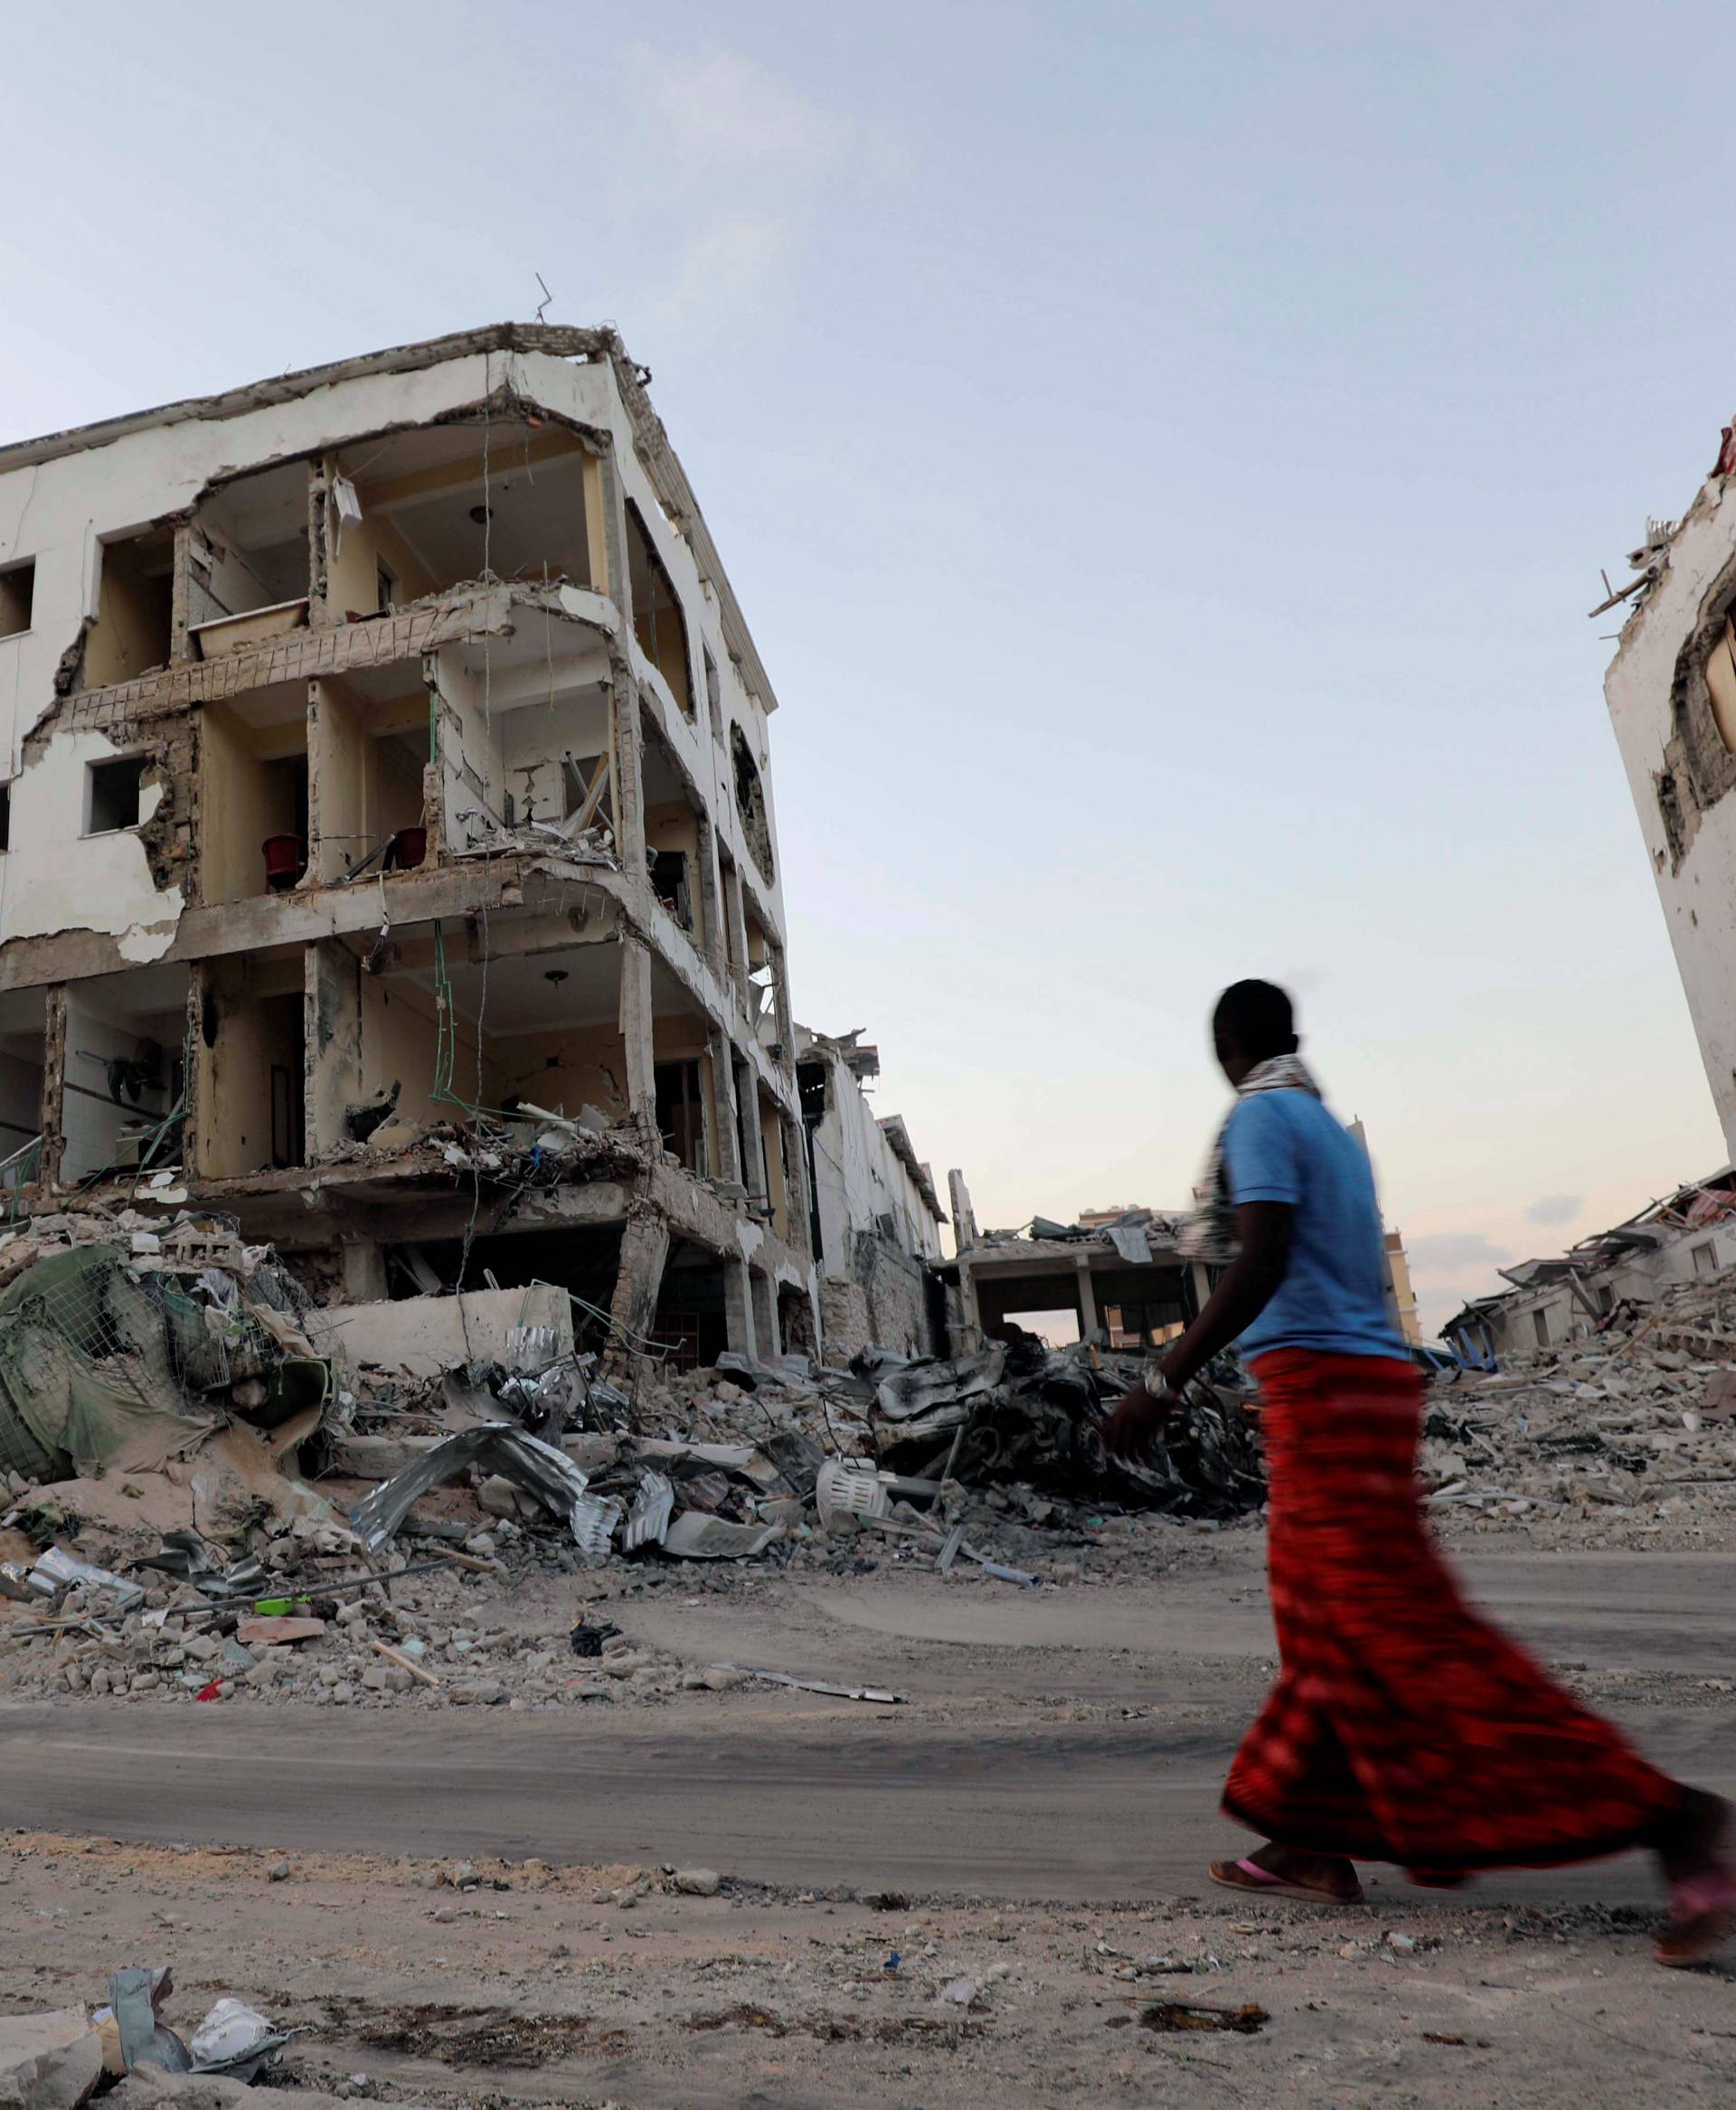 A man walks near damaged buildings after a suicide car bomb exploded, targeting a hotel in a business center in Maka Al Mukaram street, Mogadishu